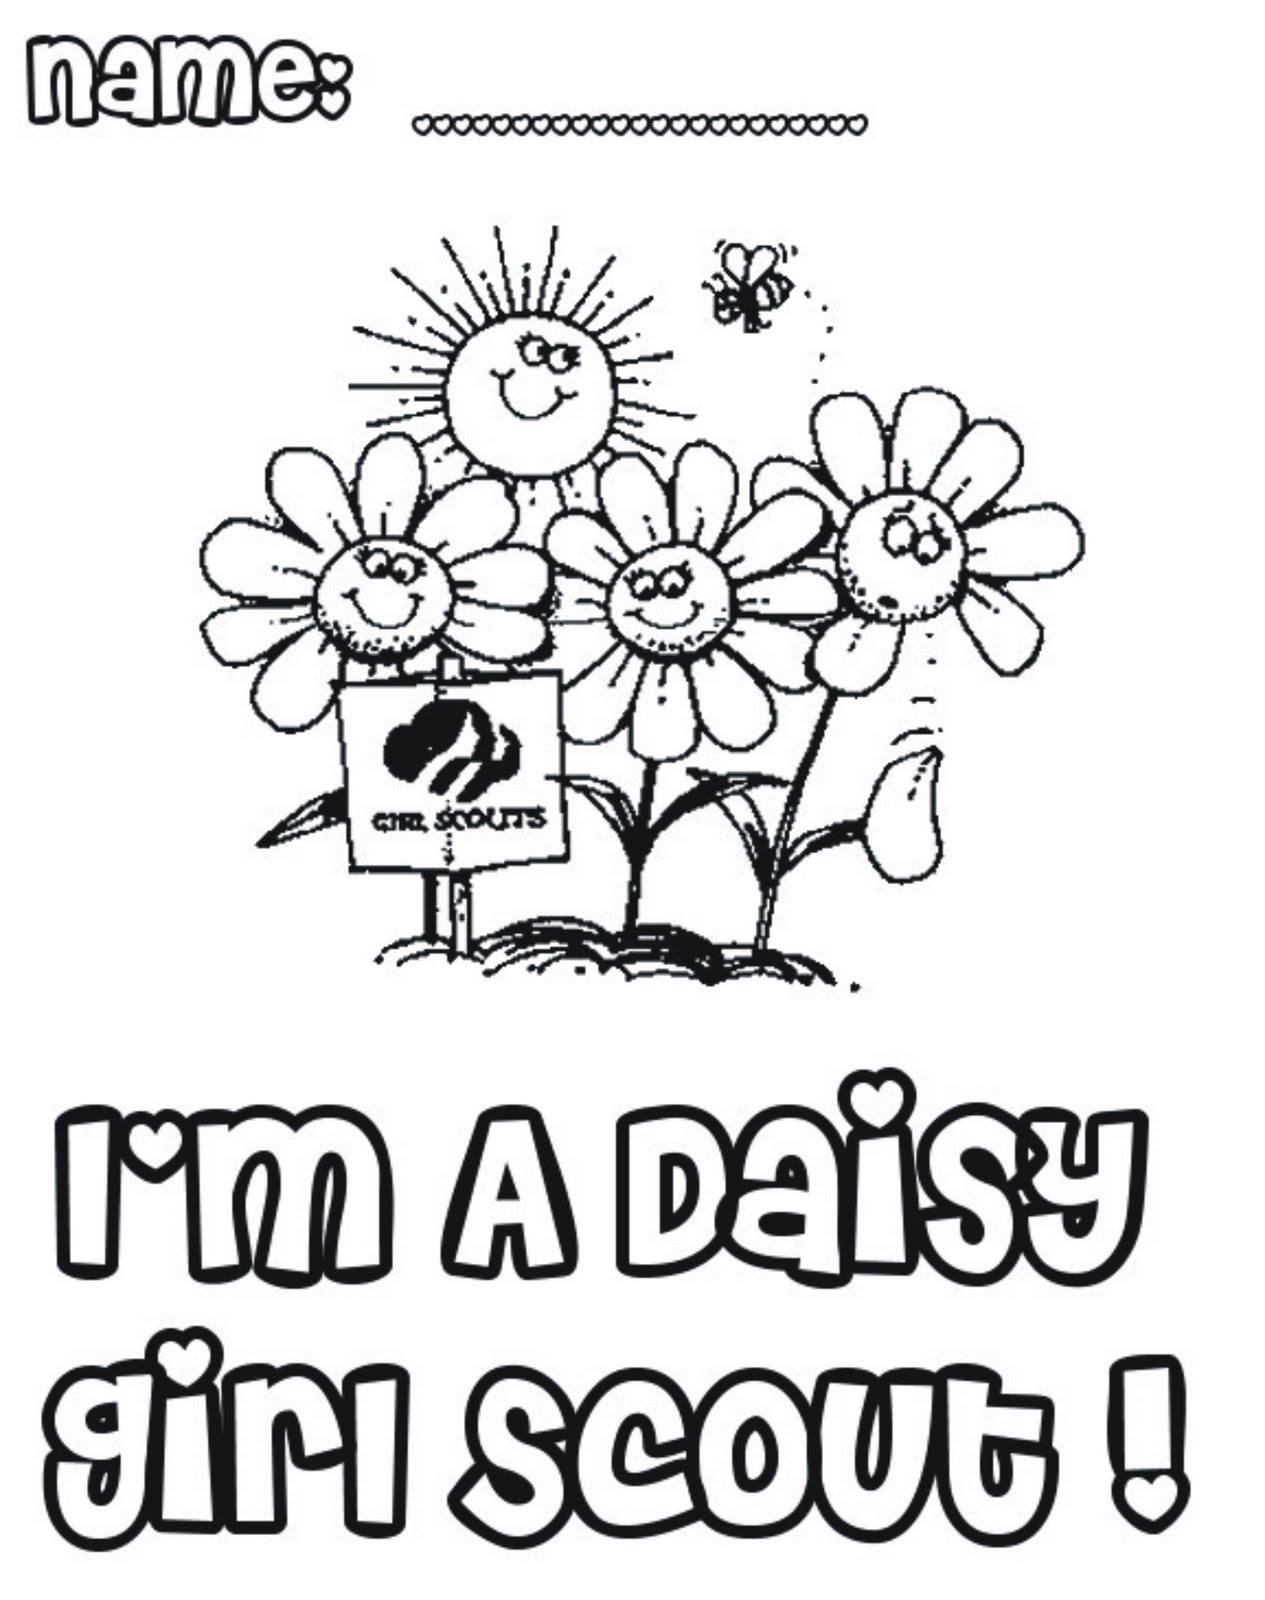 Girls Scout Daisy Coloring Pages
 Troop Leader Mom Getting Started with Girl Scout Daisies